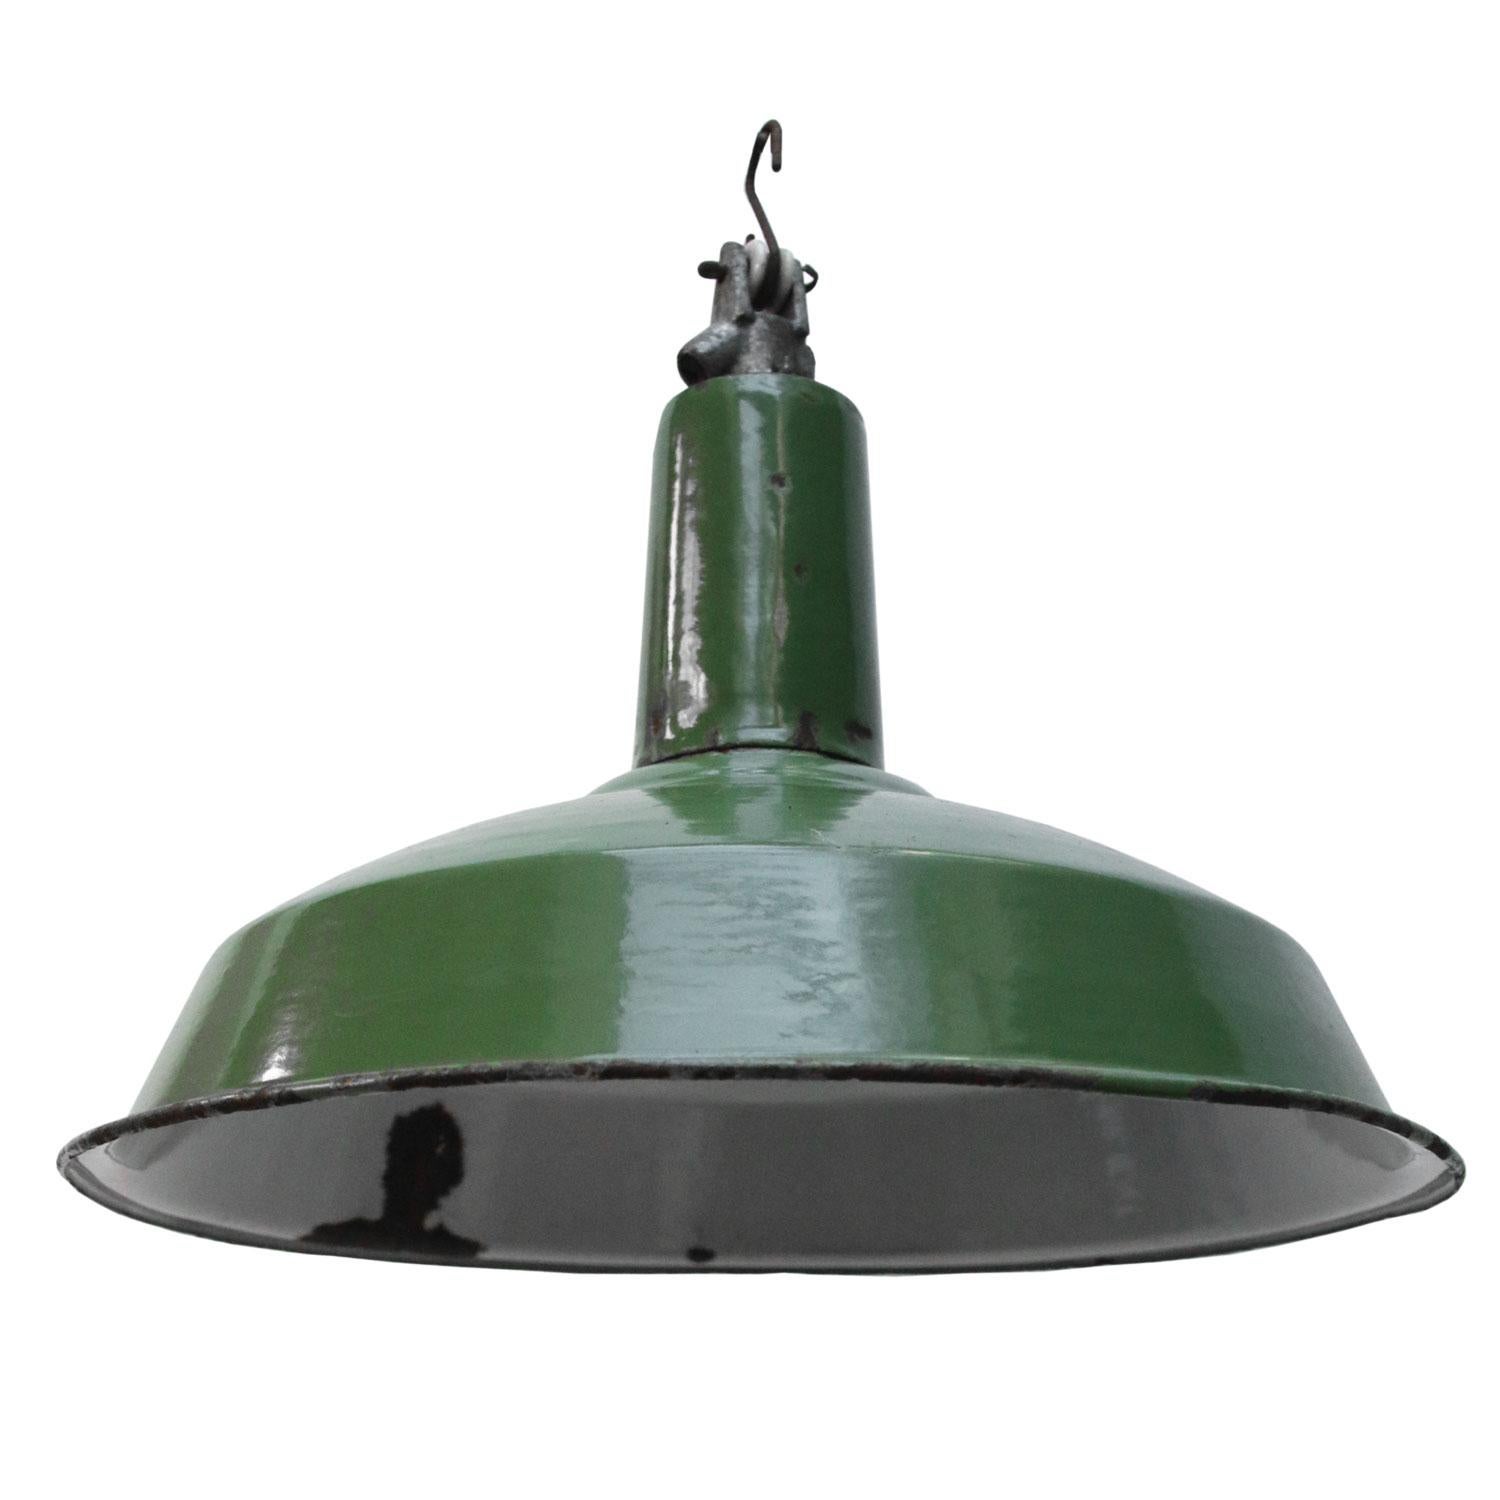 Dark green enamel factory pendant from Provence, France.
White interior.

Weight: 1.2 kg / 2.6 lb

Priced individual item. All lamps have been made suitable by international standards for incandescent light bulbs, energy-efficient and LED bulbs.